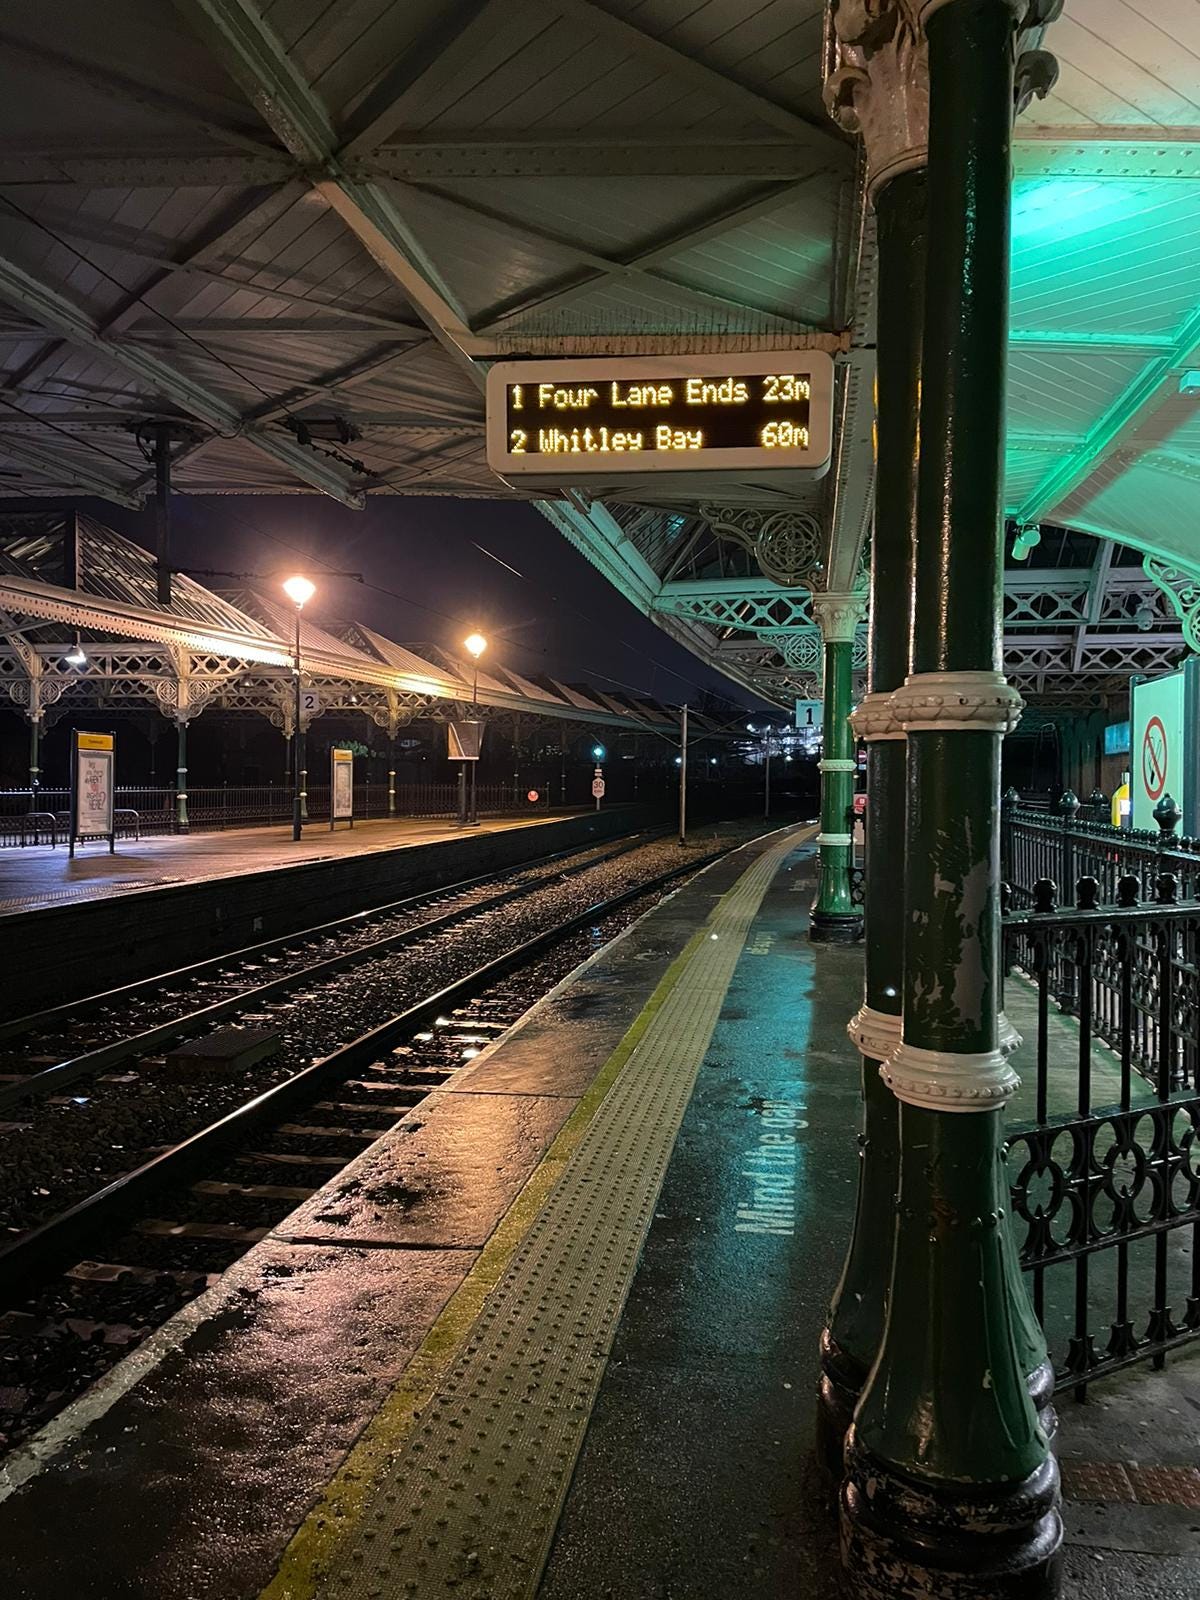 Tynemouth metro station at night. The times on the board read "Four Lane Ends, 23m; Whitley Bay, 60m"